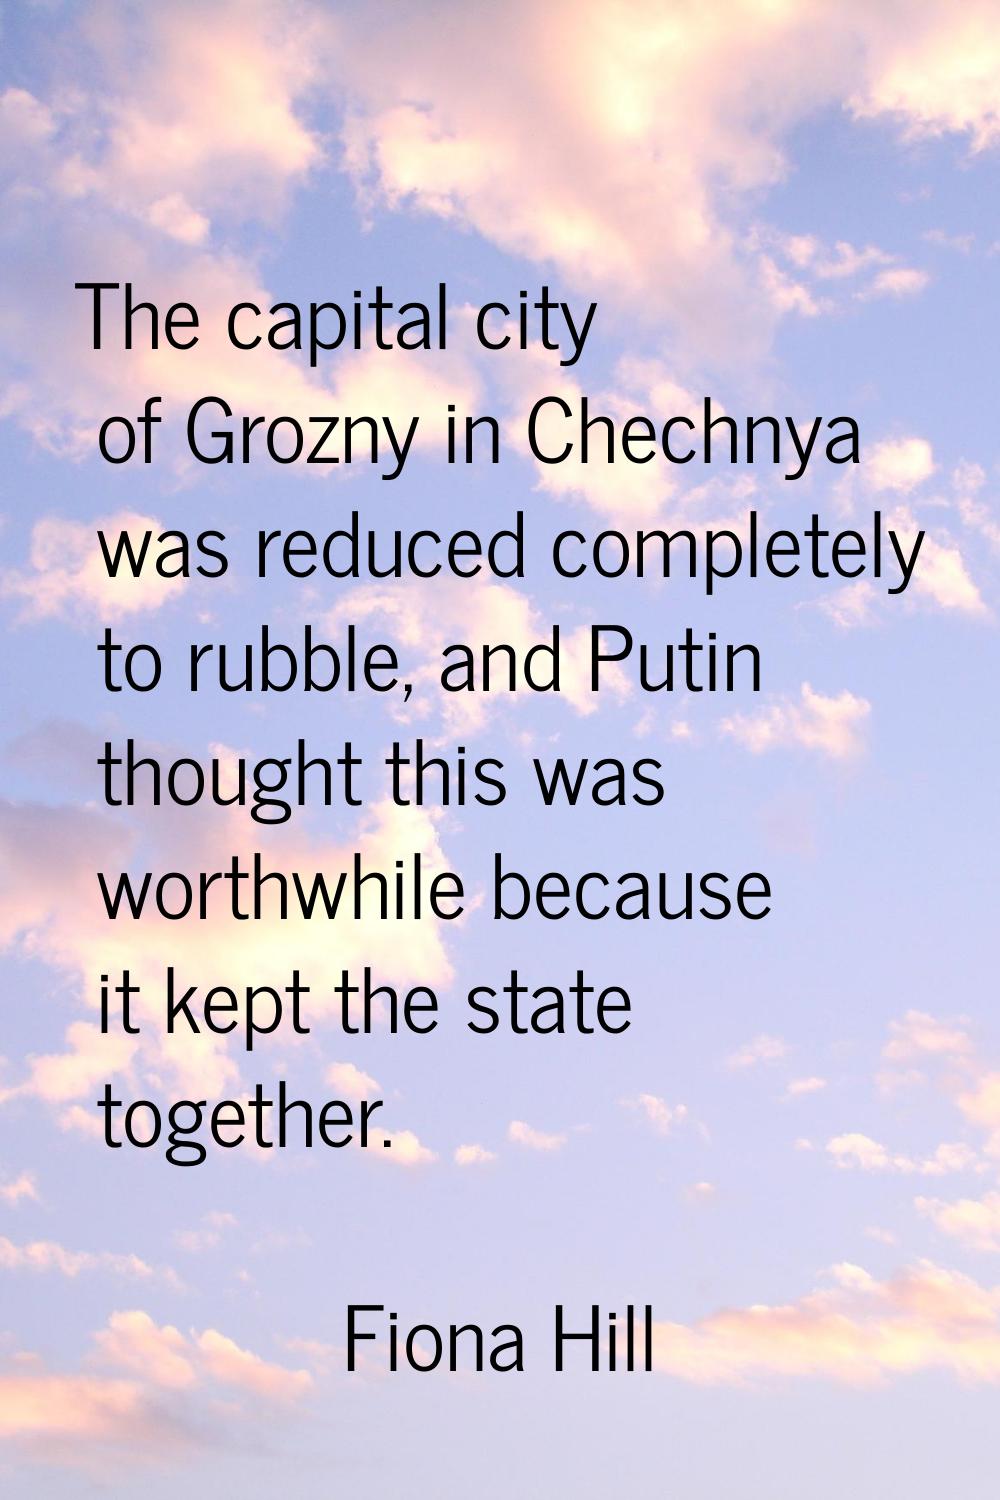 The capital city of Grozny in Chechnya was reduced completely to rubble, and Putin thought this was